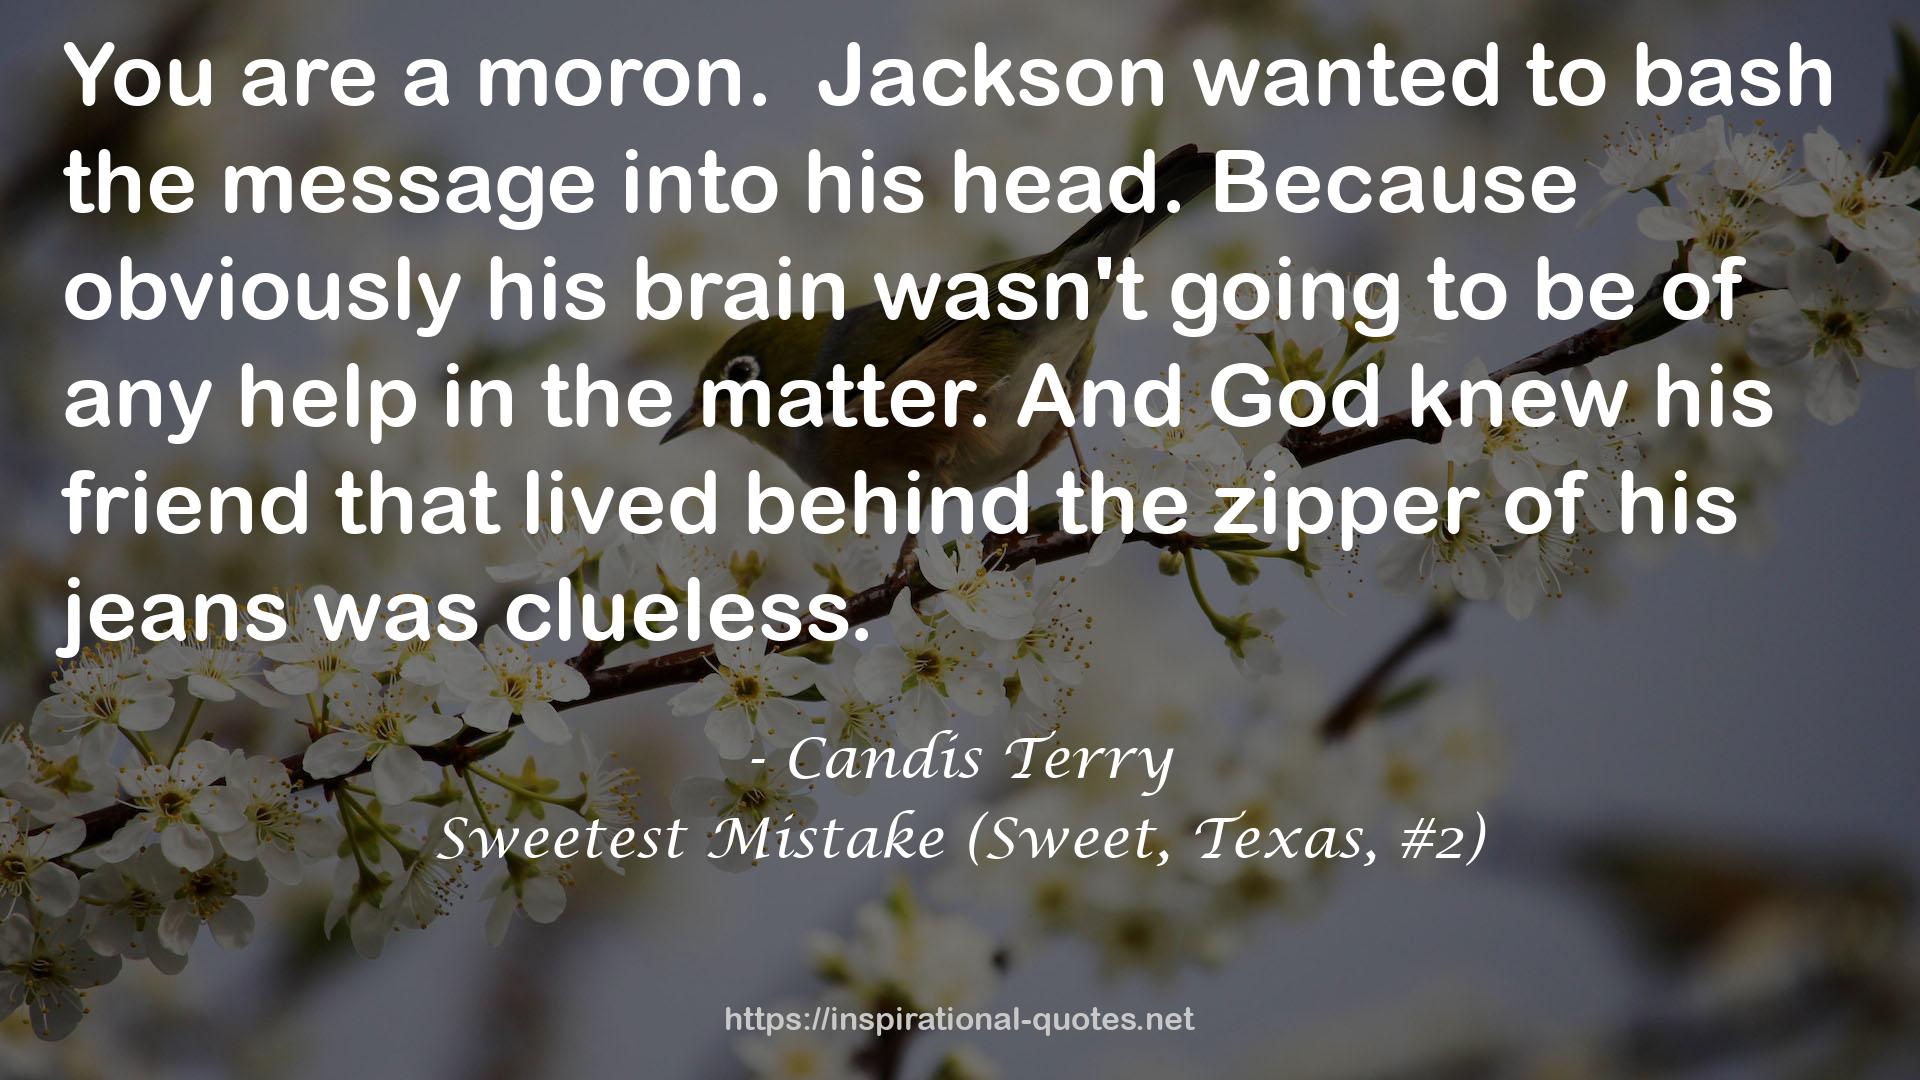 Sweetest Mistake (Sweet, Texas, #2) QUOTES